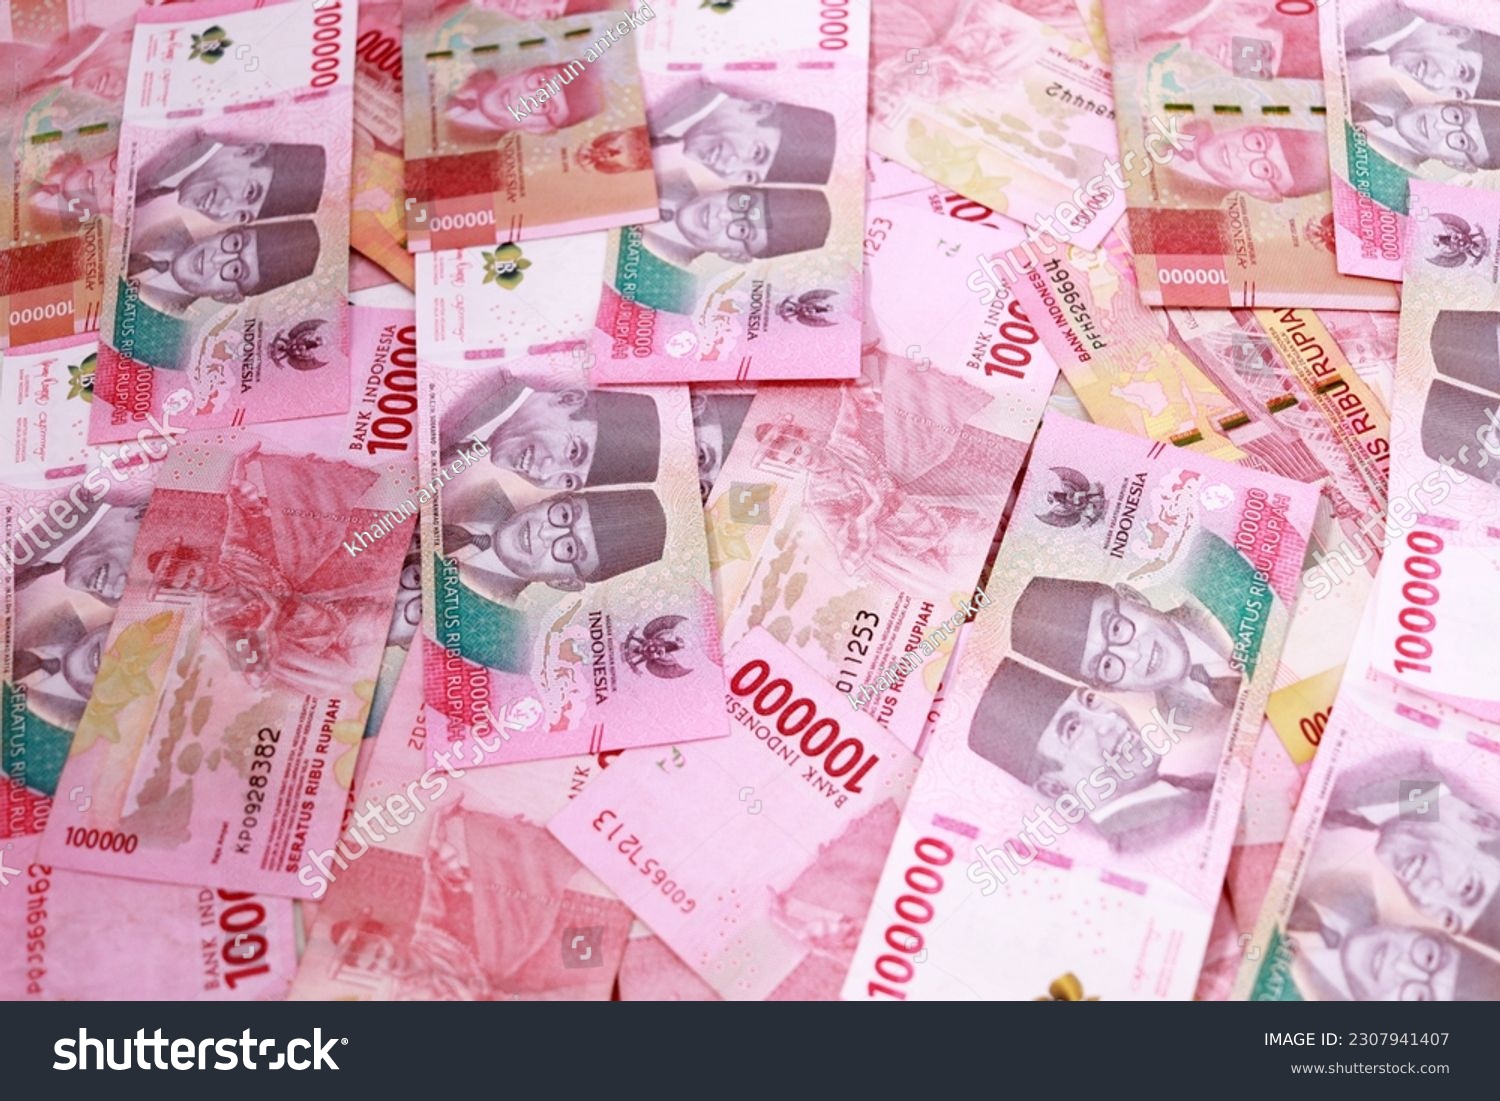 Indonesian rupiah banknotes series with the value of one hundred thousand rupiah IDR 100.000 issued since 2022, Indonesian rupiah for background #2307941407